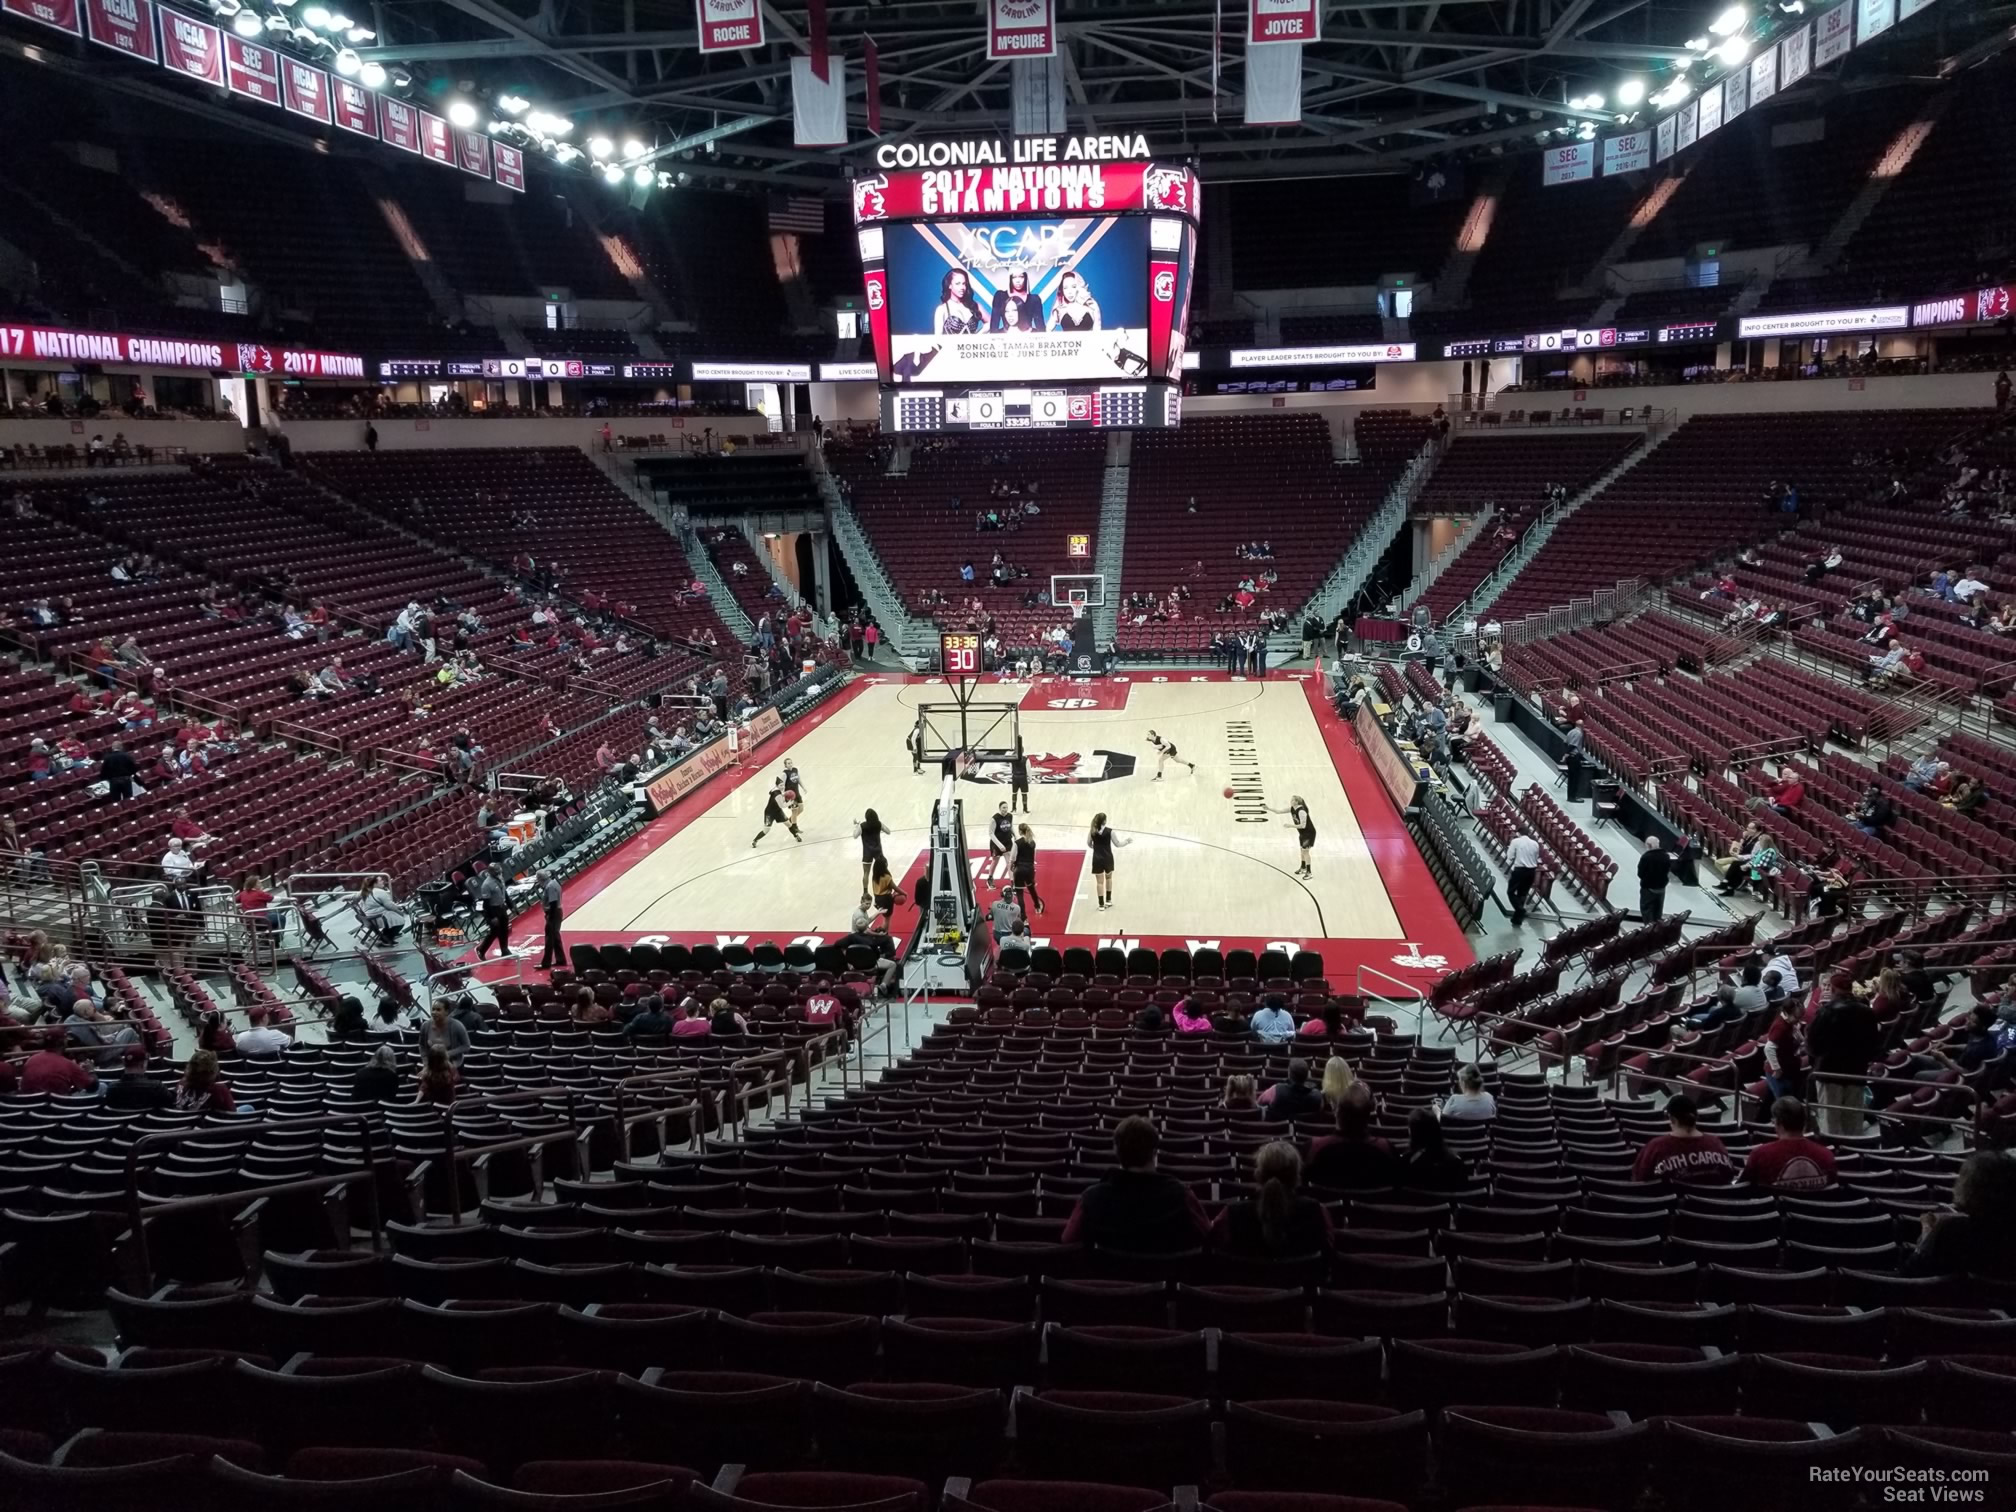 Colonial Life Arena Seating Chart Rows